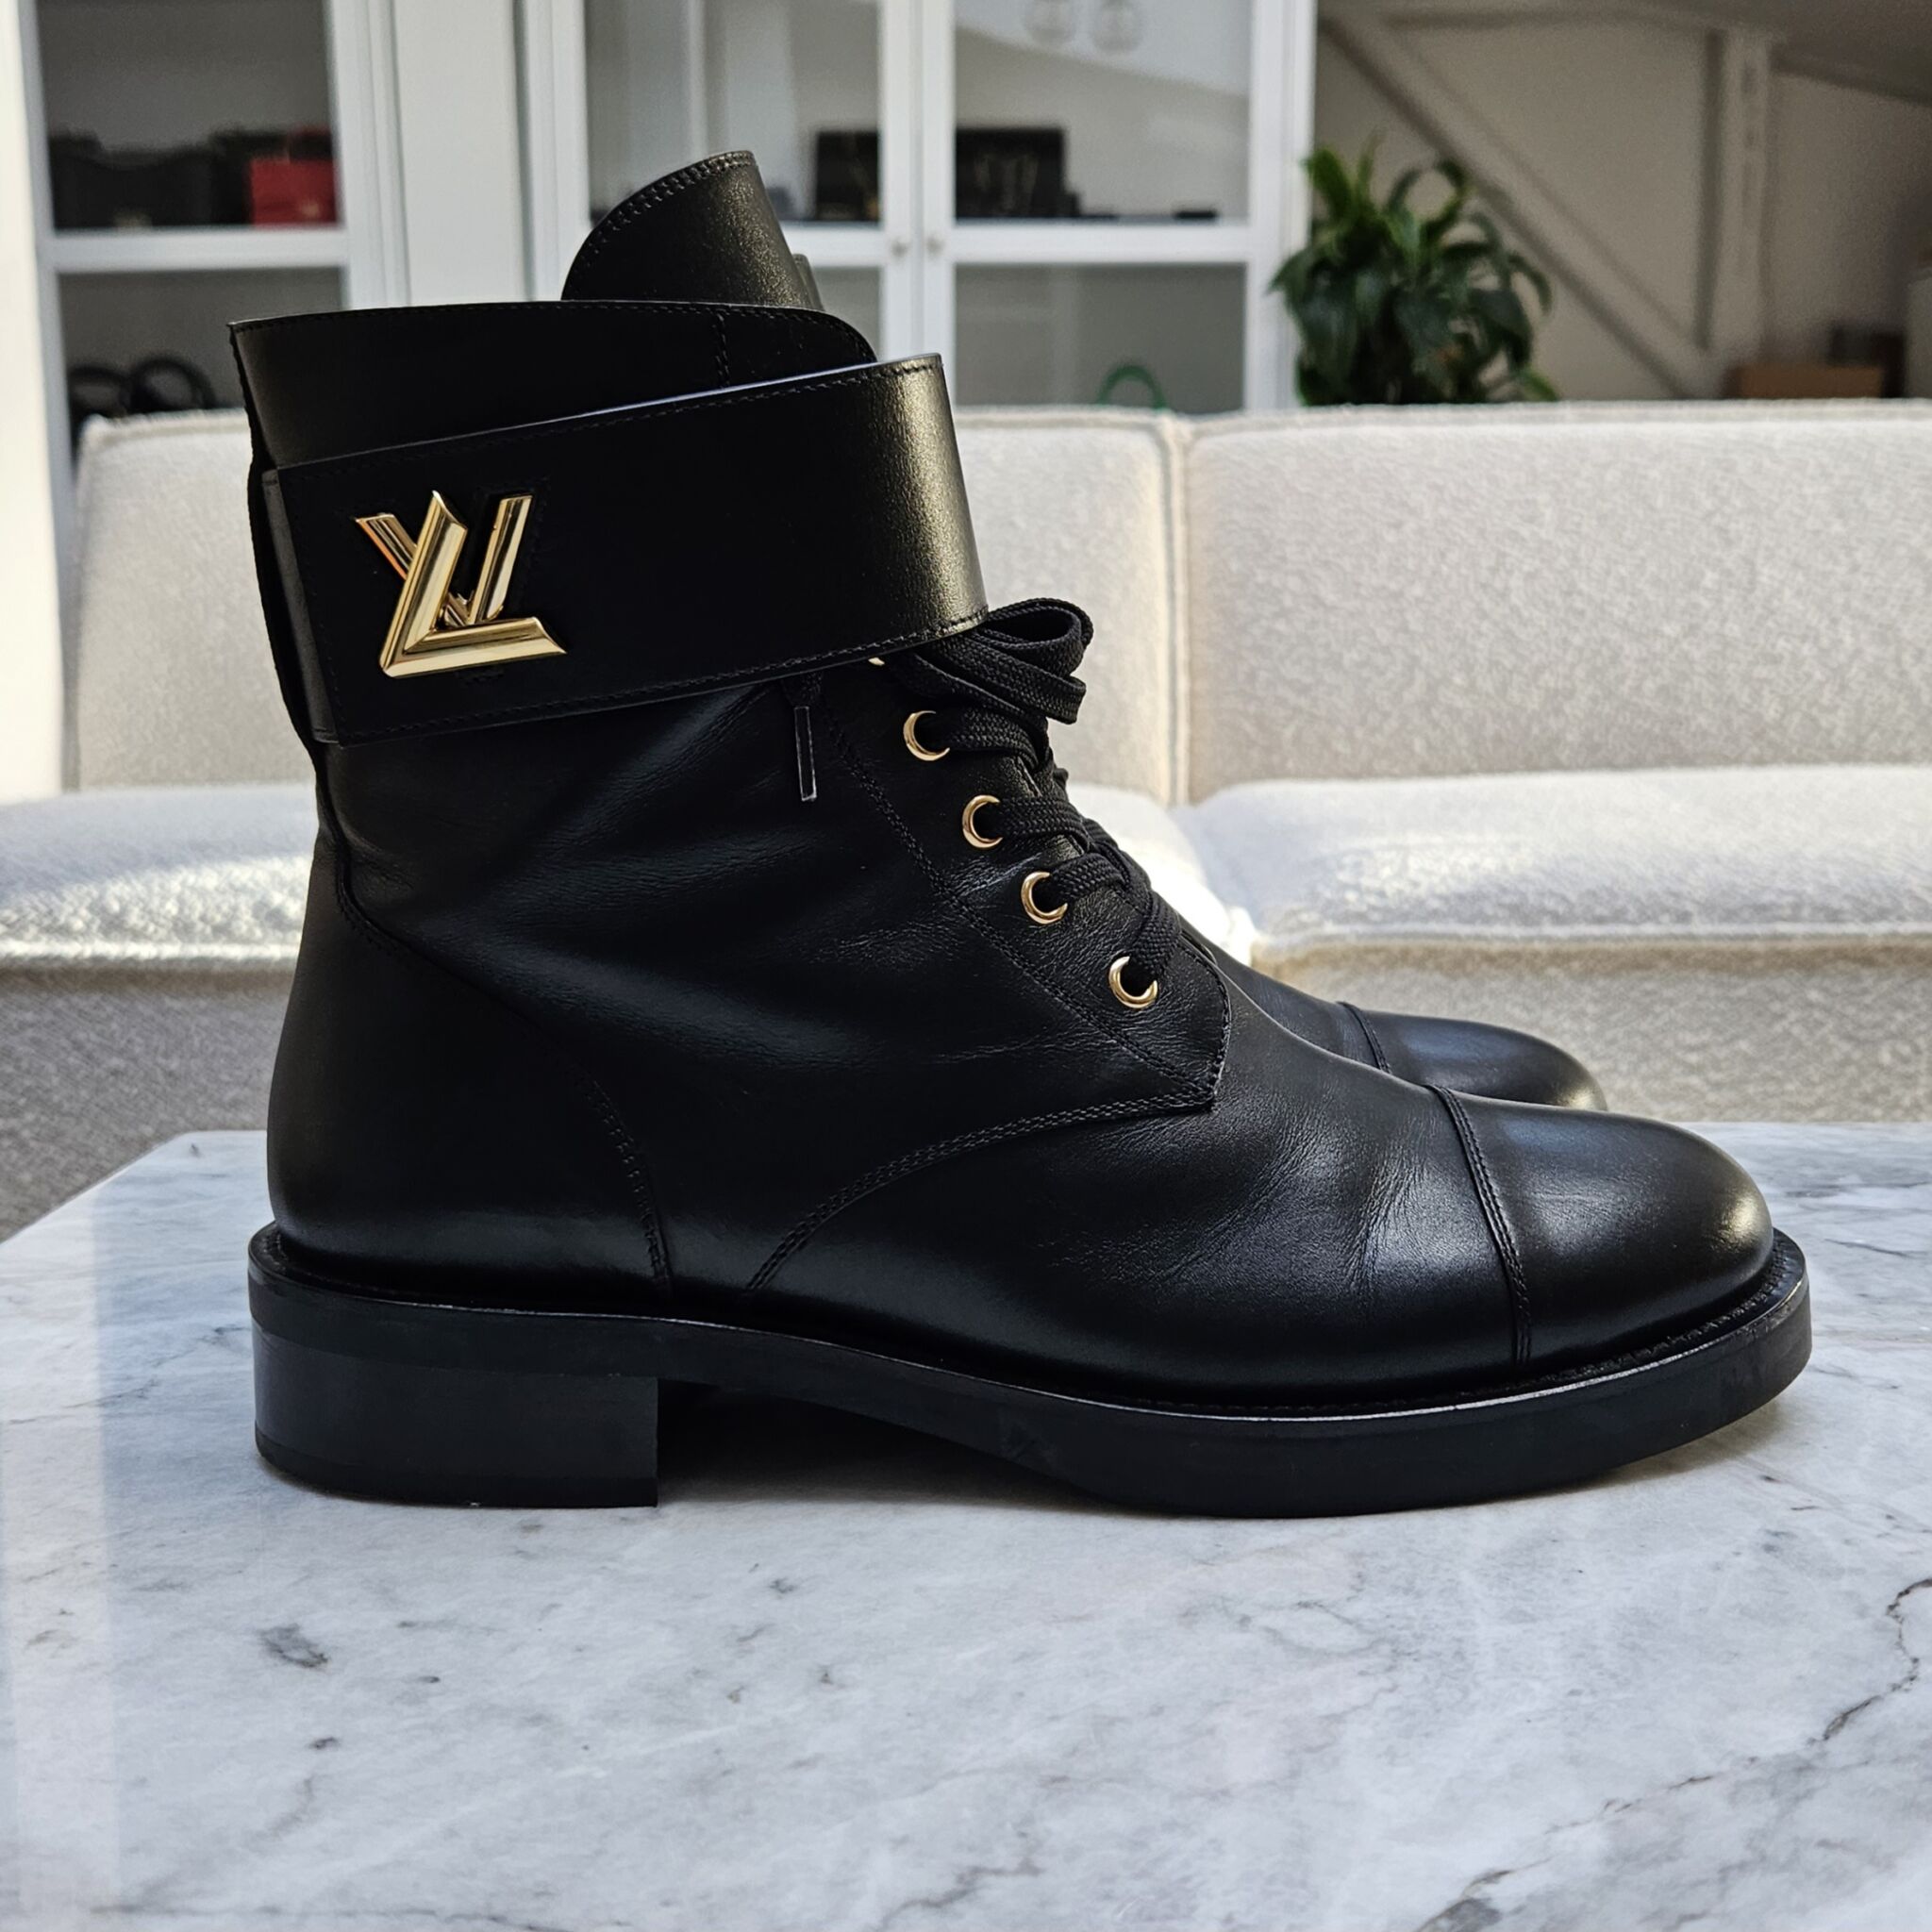 NEW LOUIS VUITTON BOOTS WONDERLAND RANGERS SHOES 38 LEATHER OOTS